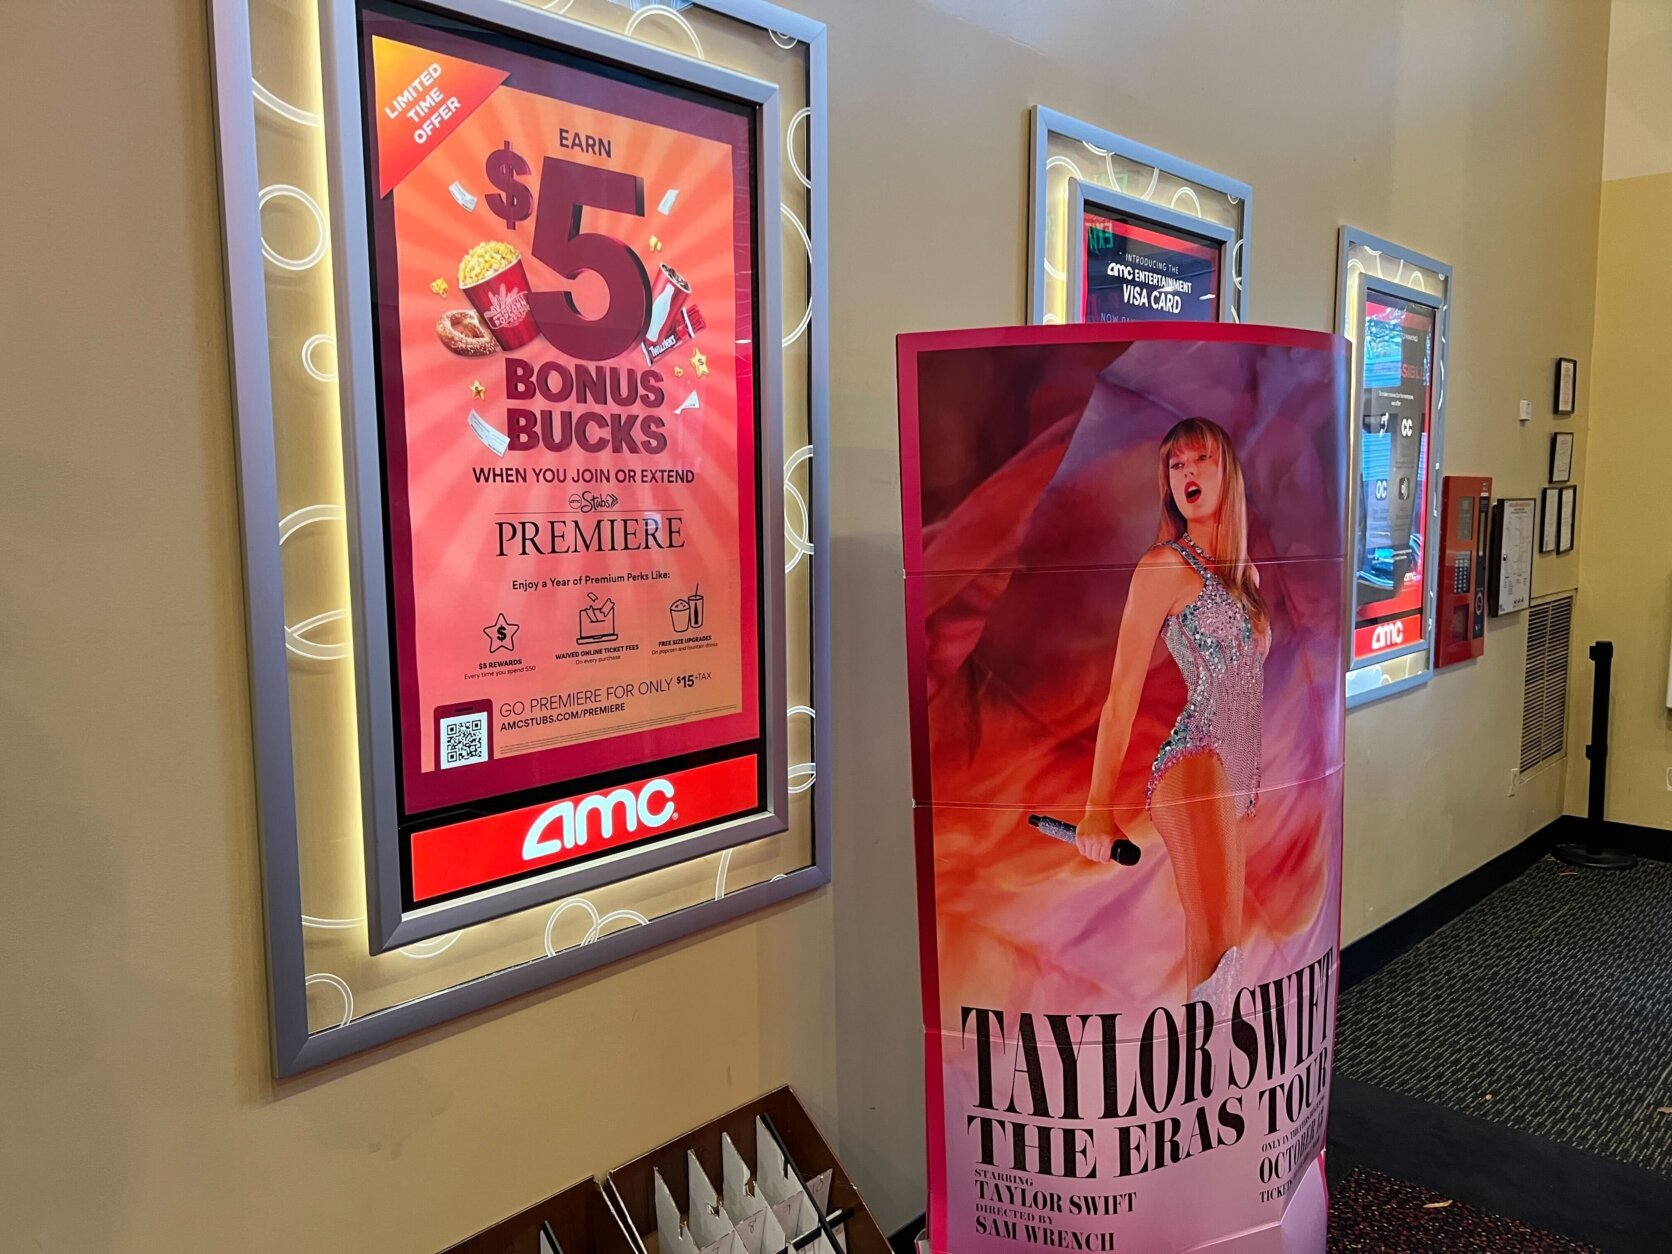 A poster for Taylor Swift's film.